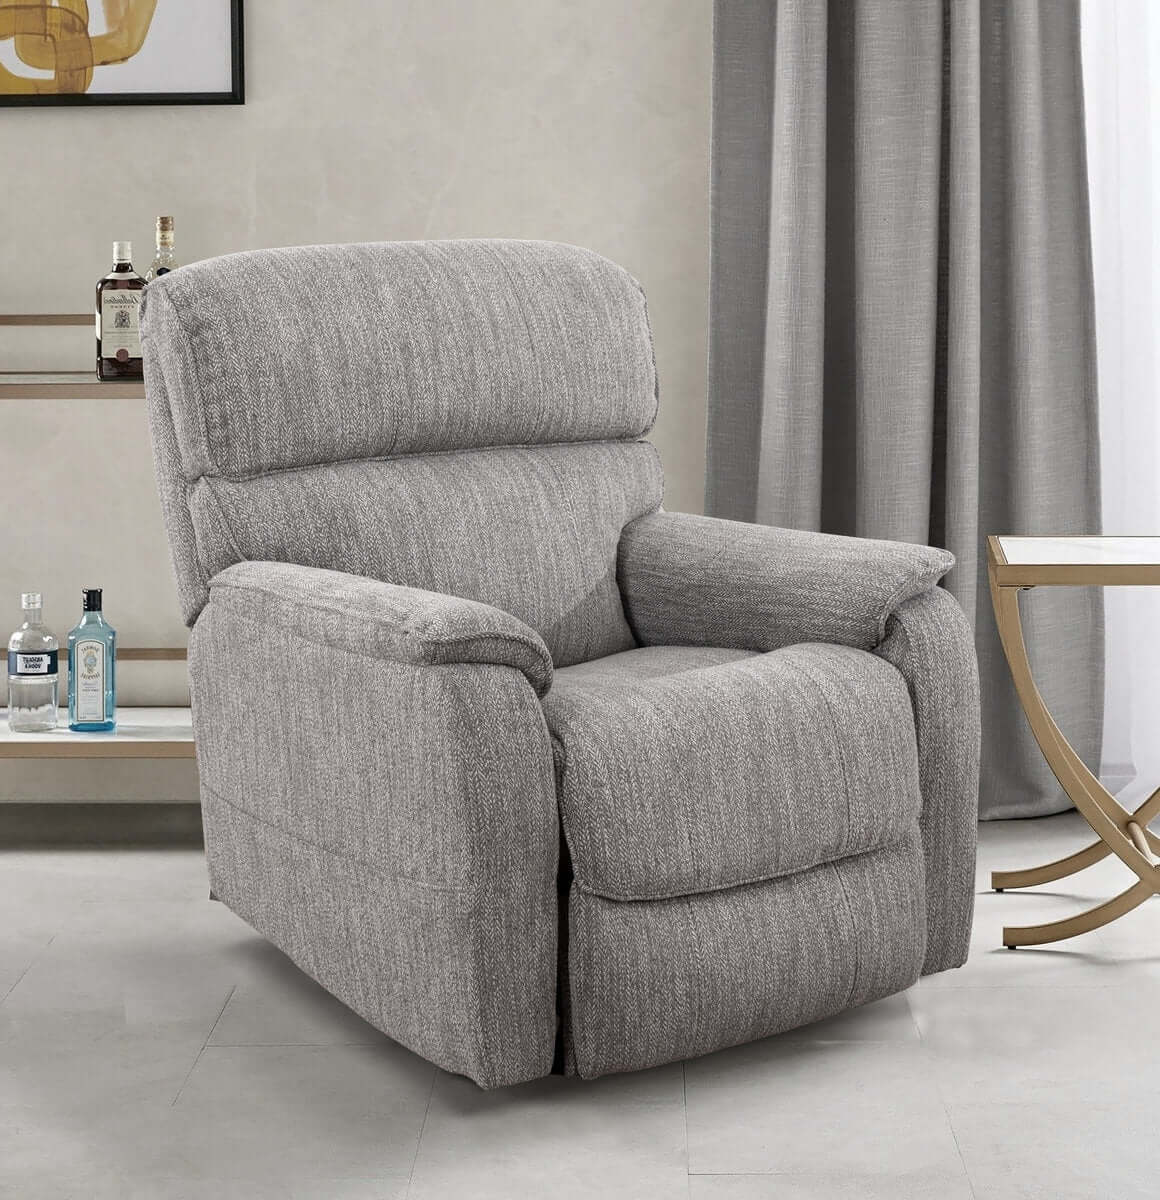 International Furniture Distribution Centre - Grey Fabric Lift Chair with Solid Hardwood Frame - IF 6360